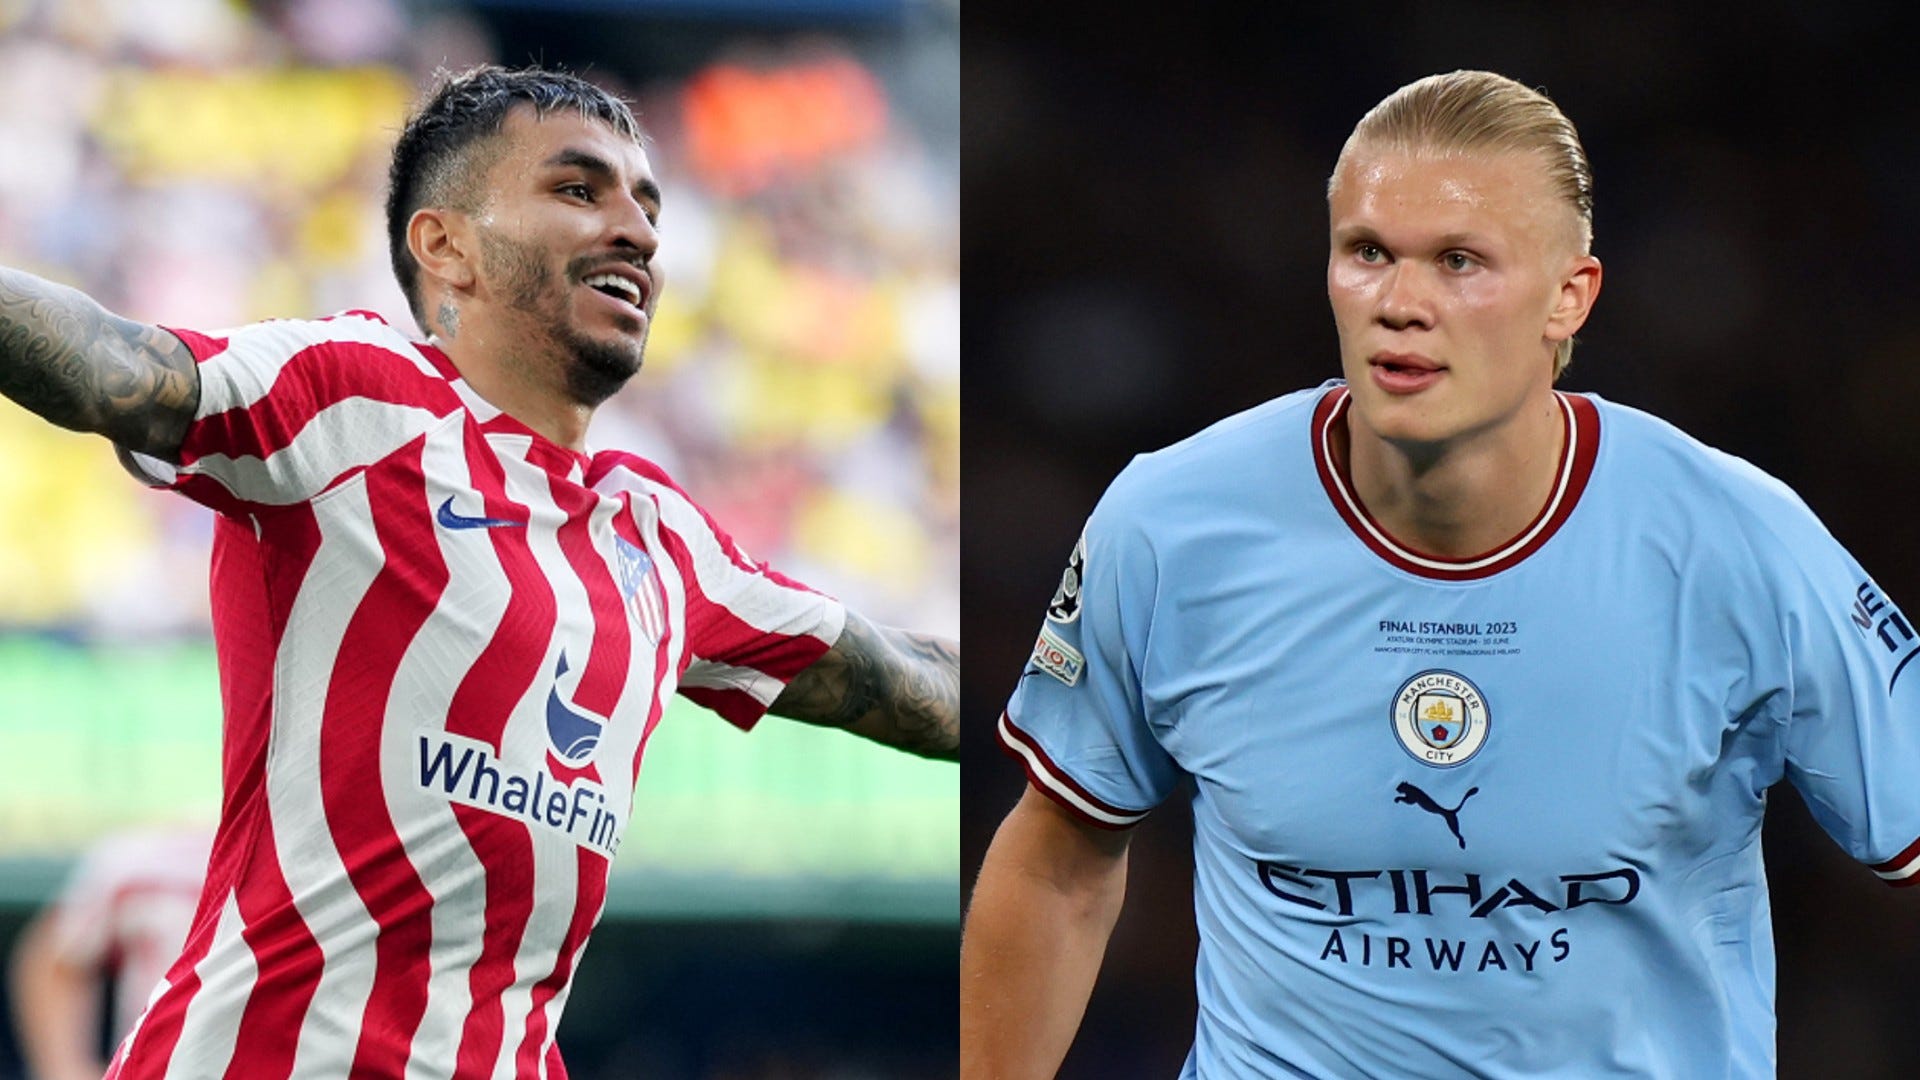 Atlético vs Man City Where to watch the match online, live stream, TV channels, and kick-off time Goal US